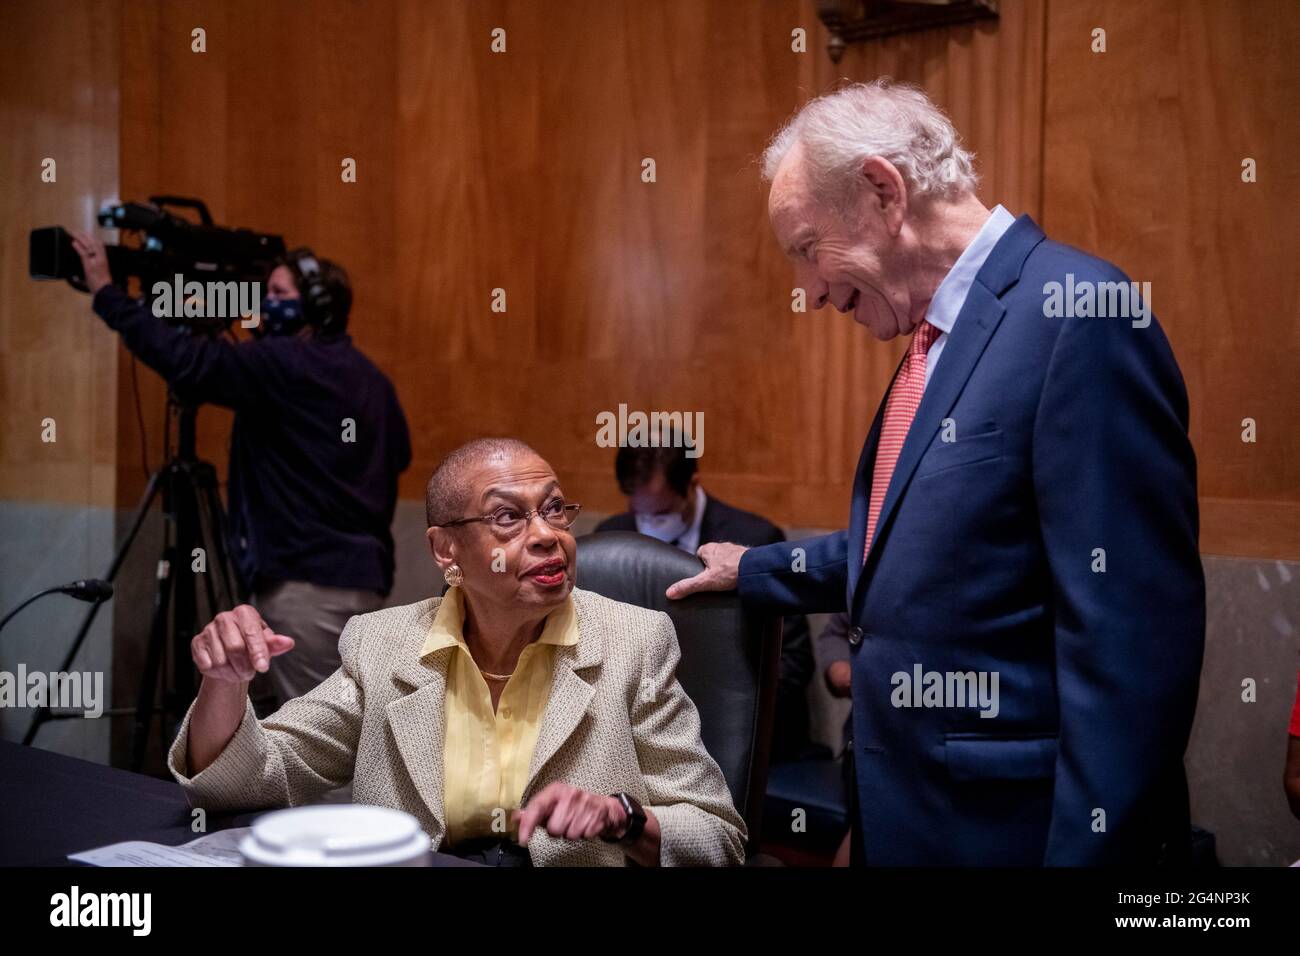 Former United States Senator Joseph I. Lieberman (Independent of Connecticut), right, is greeted by Delegate Eleanor Holmes Norton (Democrat of the District of Columbia) as they arrive for a Senate Committee on Homeland Security and Governmental Affairs hearing to examine D.C. statehood, in the Dirksen Senate Office Building in Washington, DC, Tuesday, June 22, 2021. Credit: Rod Lamkey/CNP /MediaPunch Stock Photo